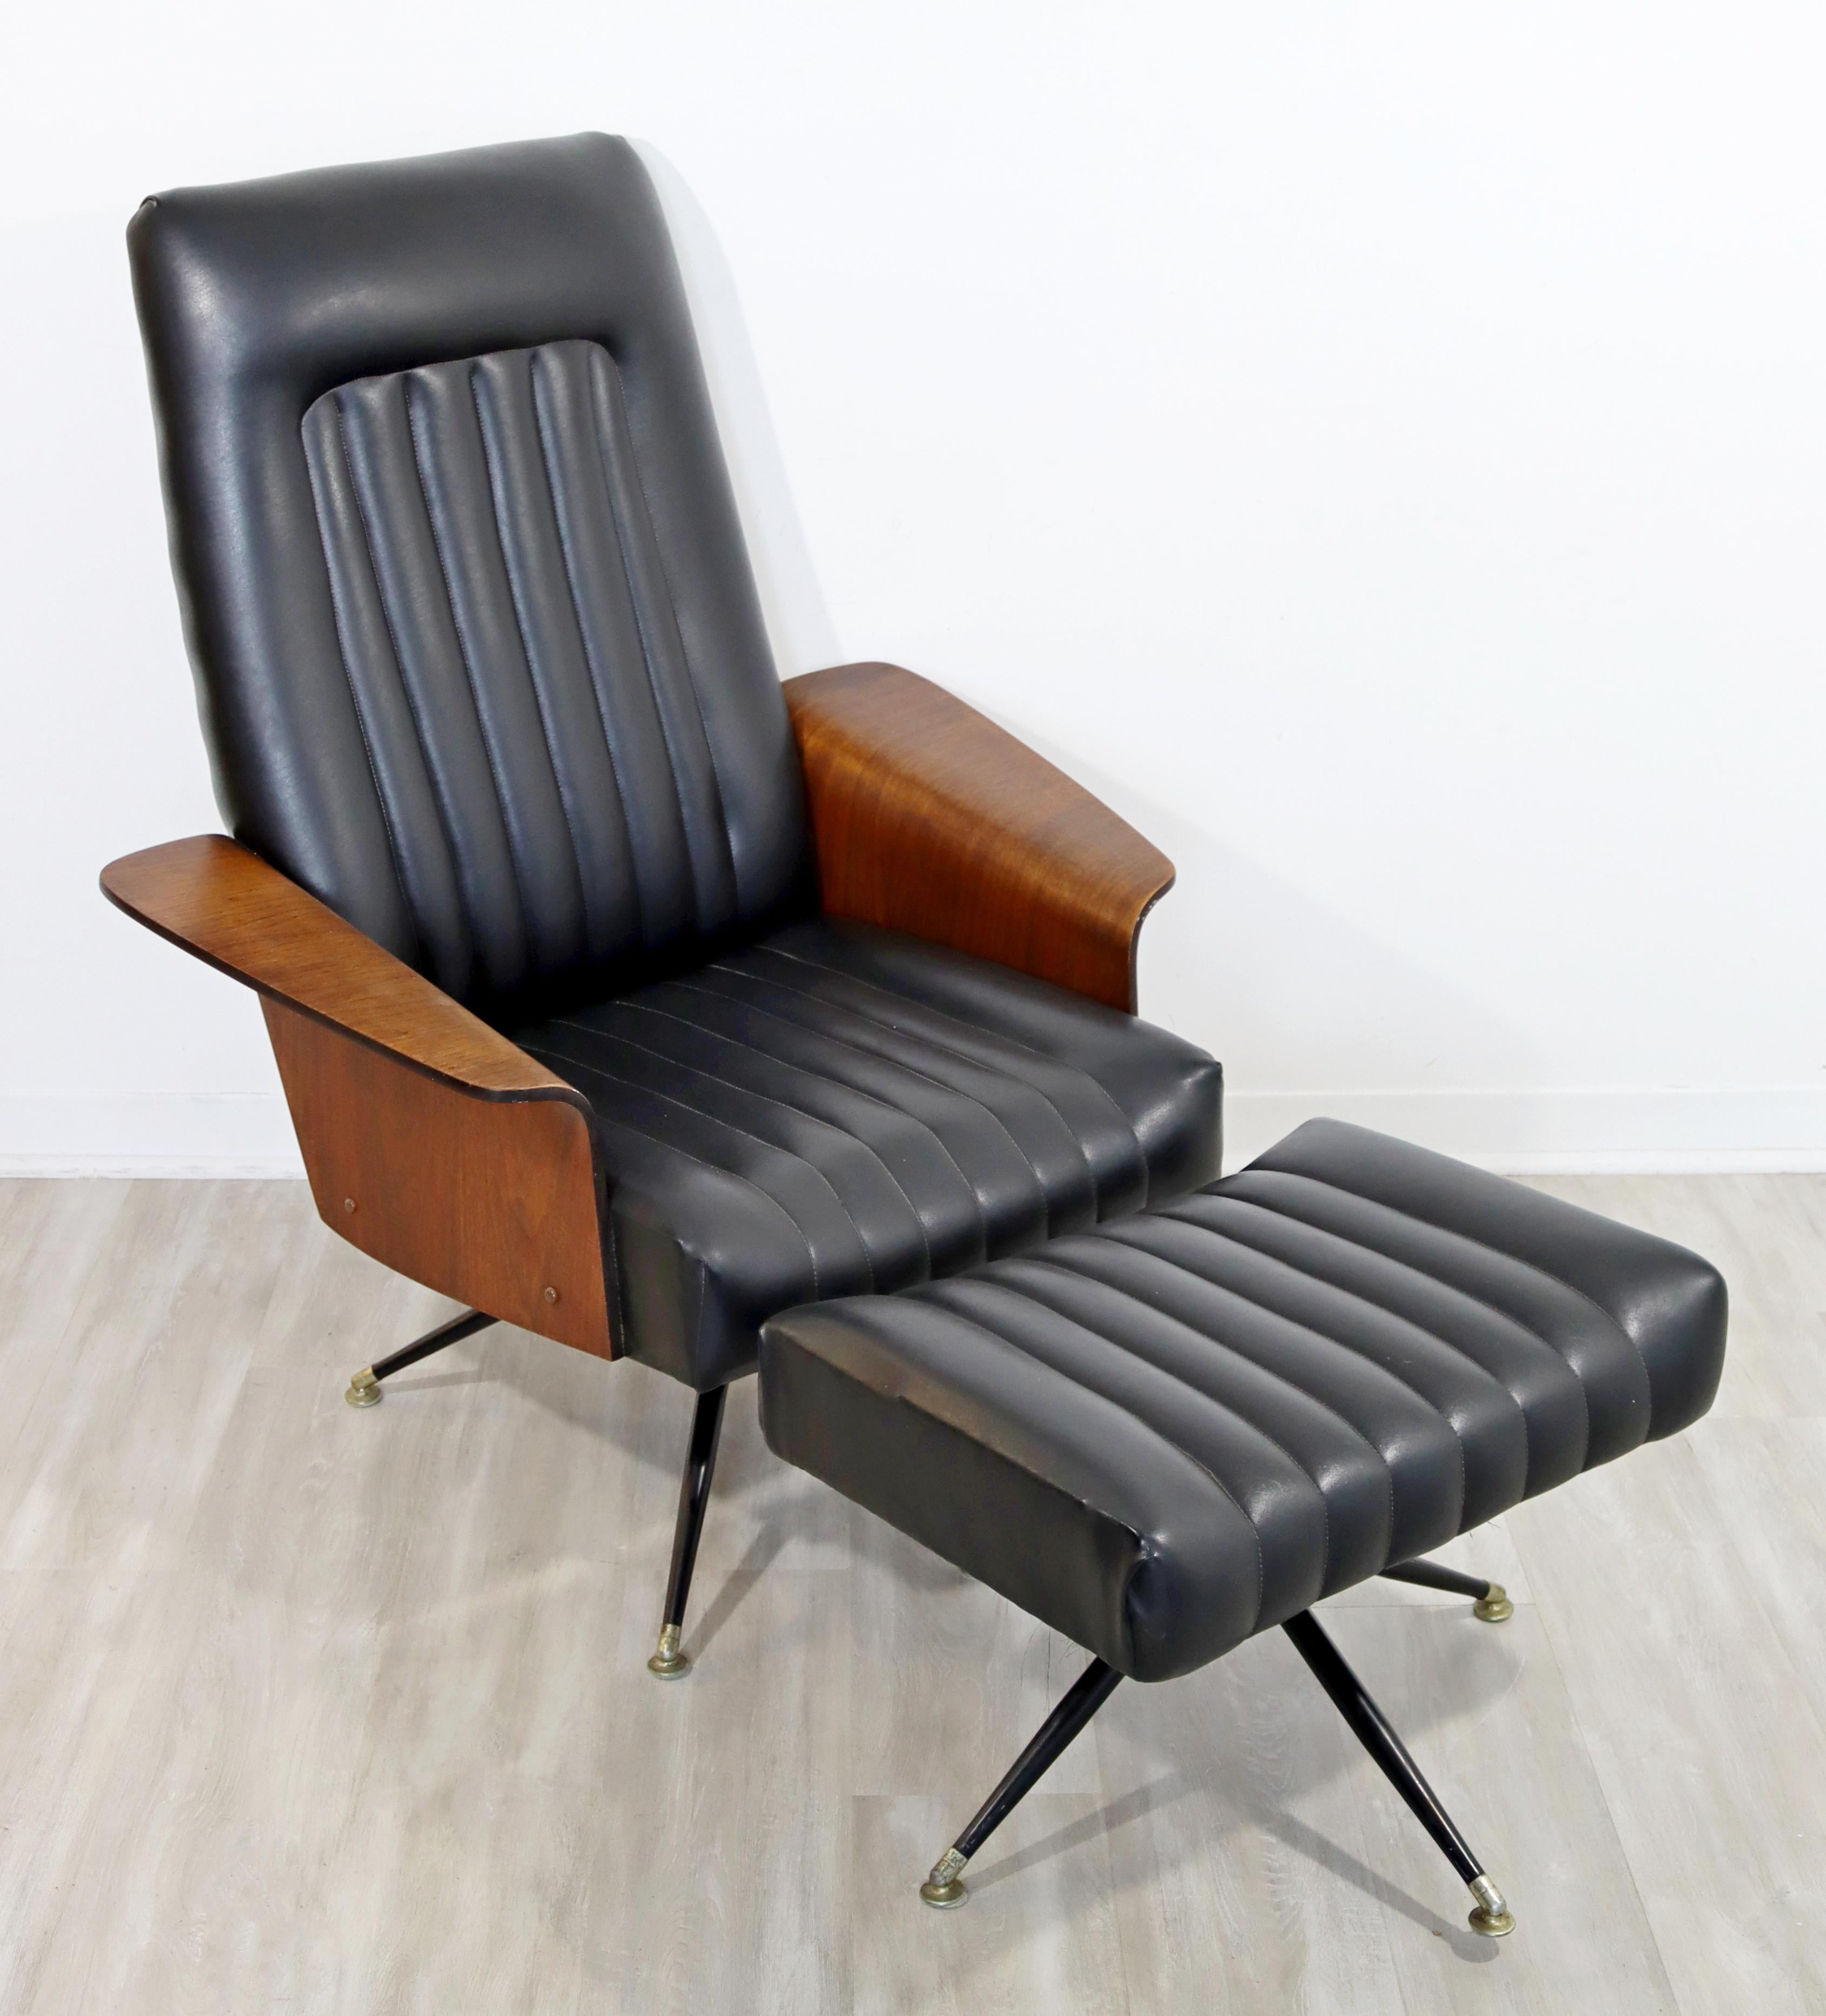 For your consideration is a luxe looking lounge chair and matching ottoman, made of walnut and Naugahyde, by George Mulhauser, circa the 1960s. In excellent vintage condition. The dimensions of the chair are 34.5